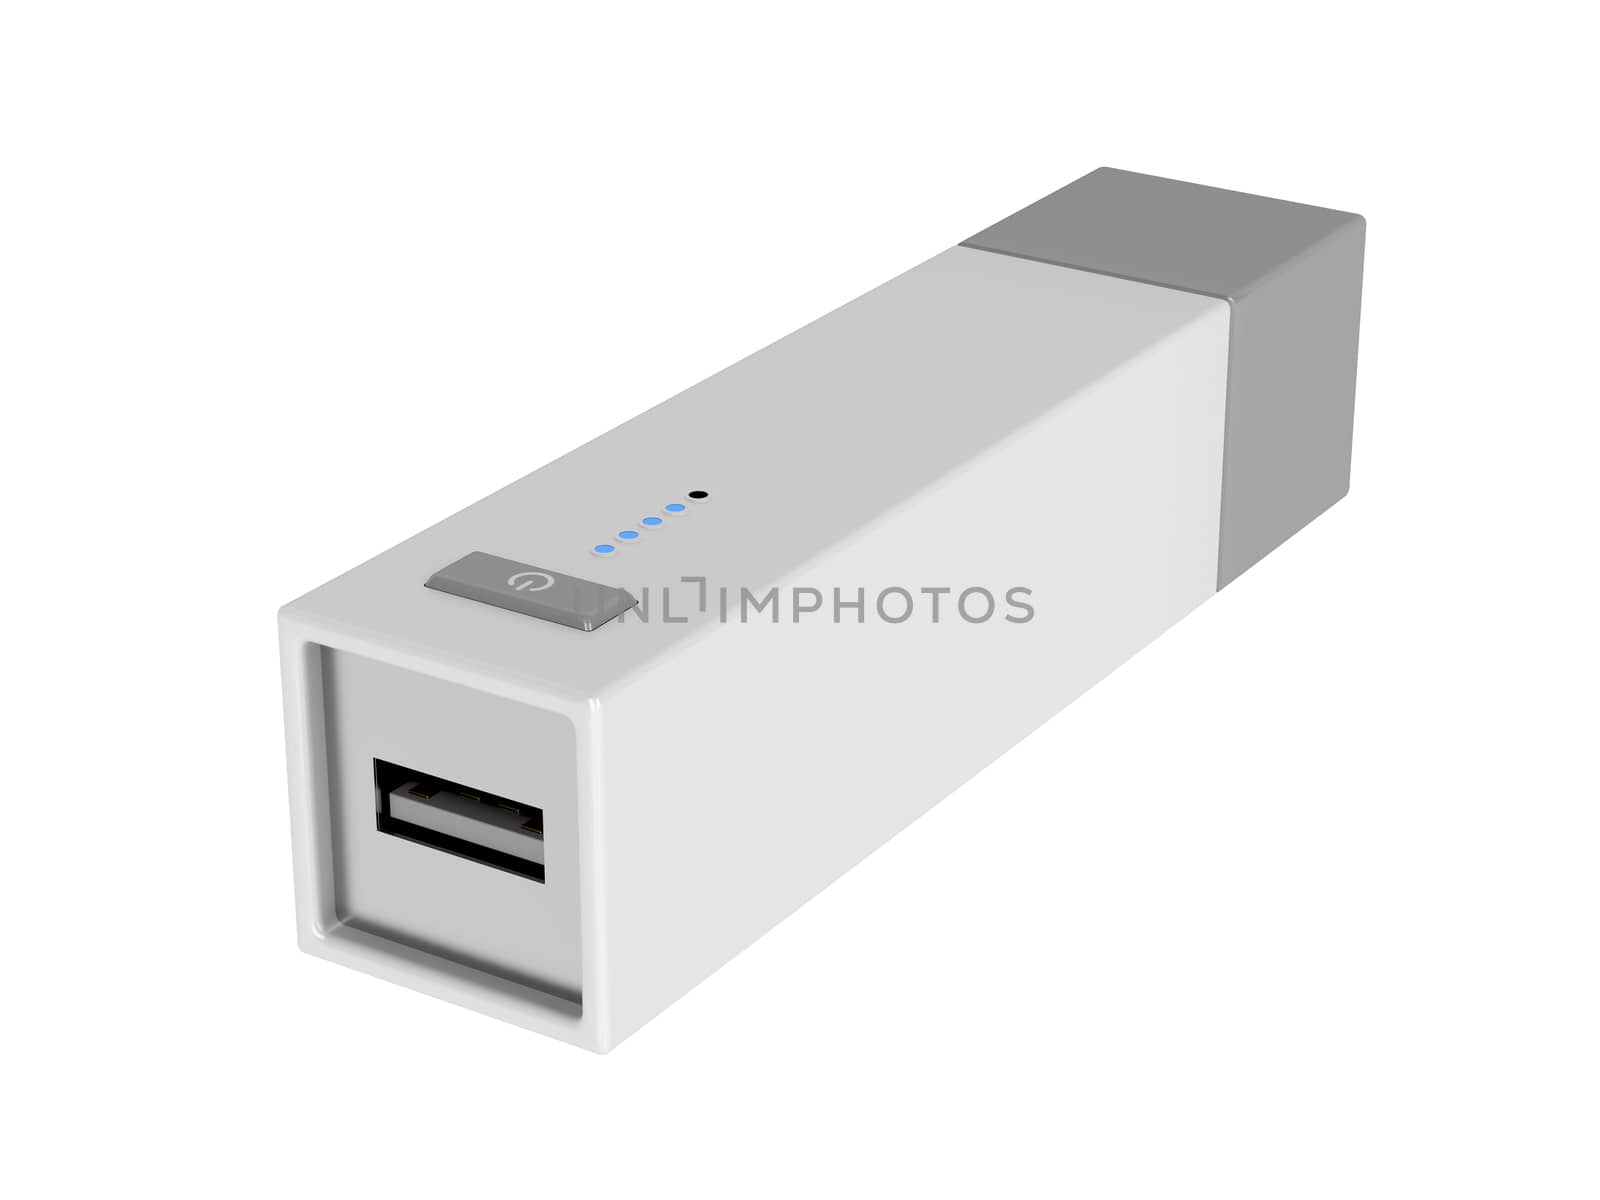 Usb battery pack isolated on white background